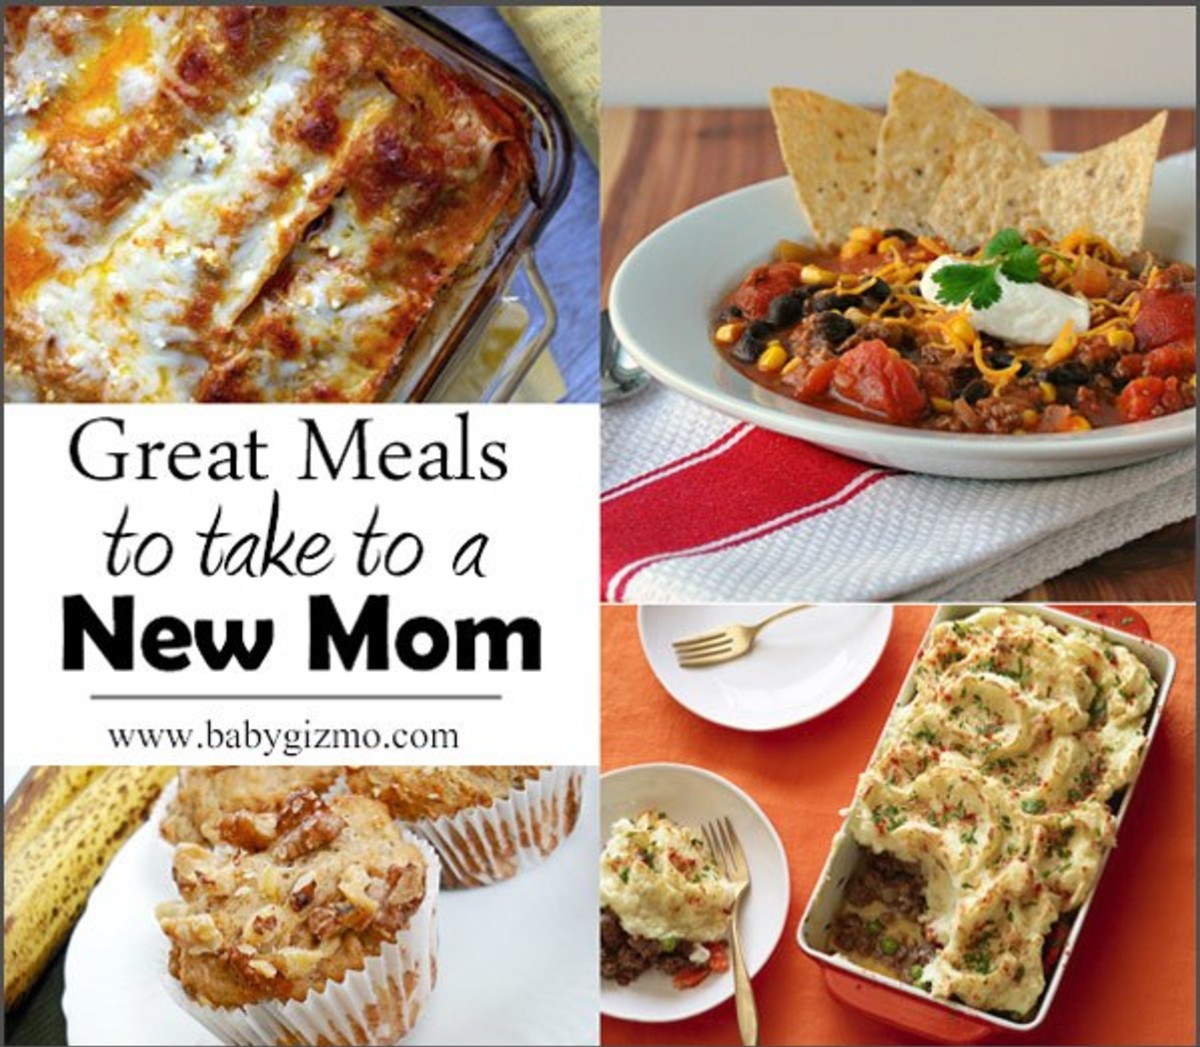 Meals to take to a new mom